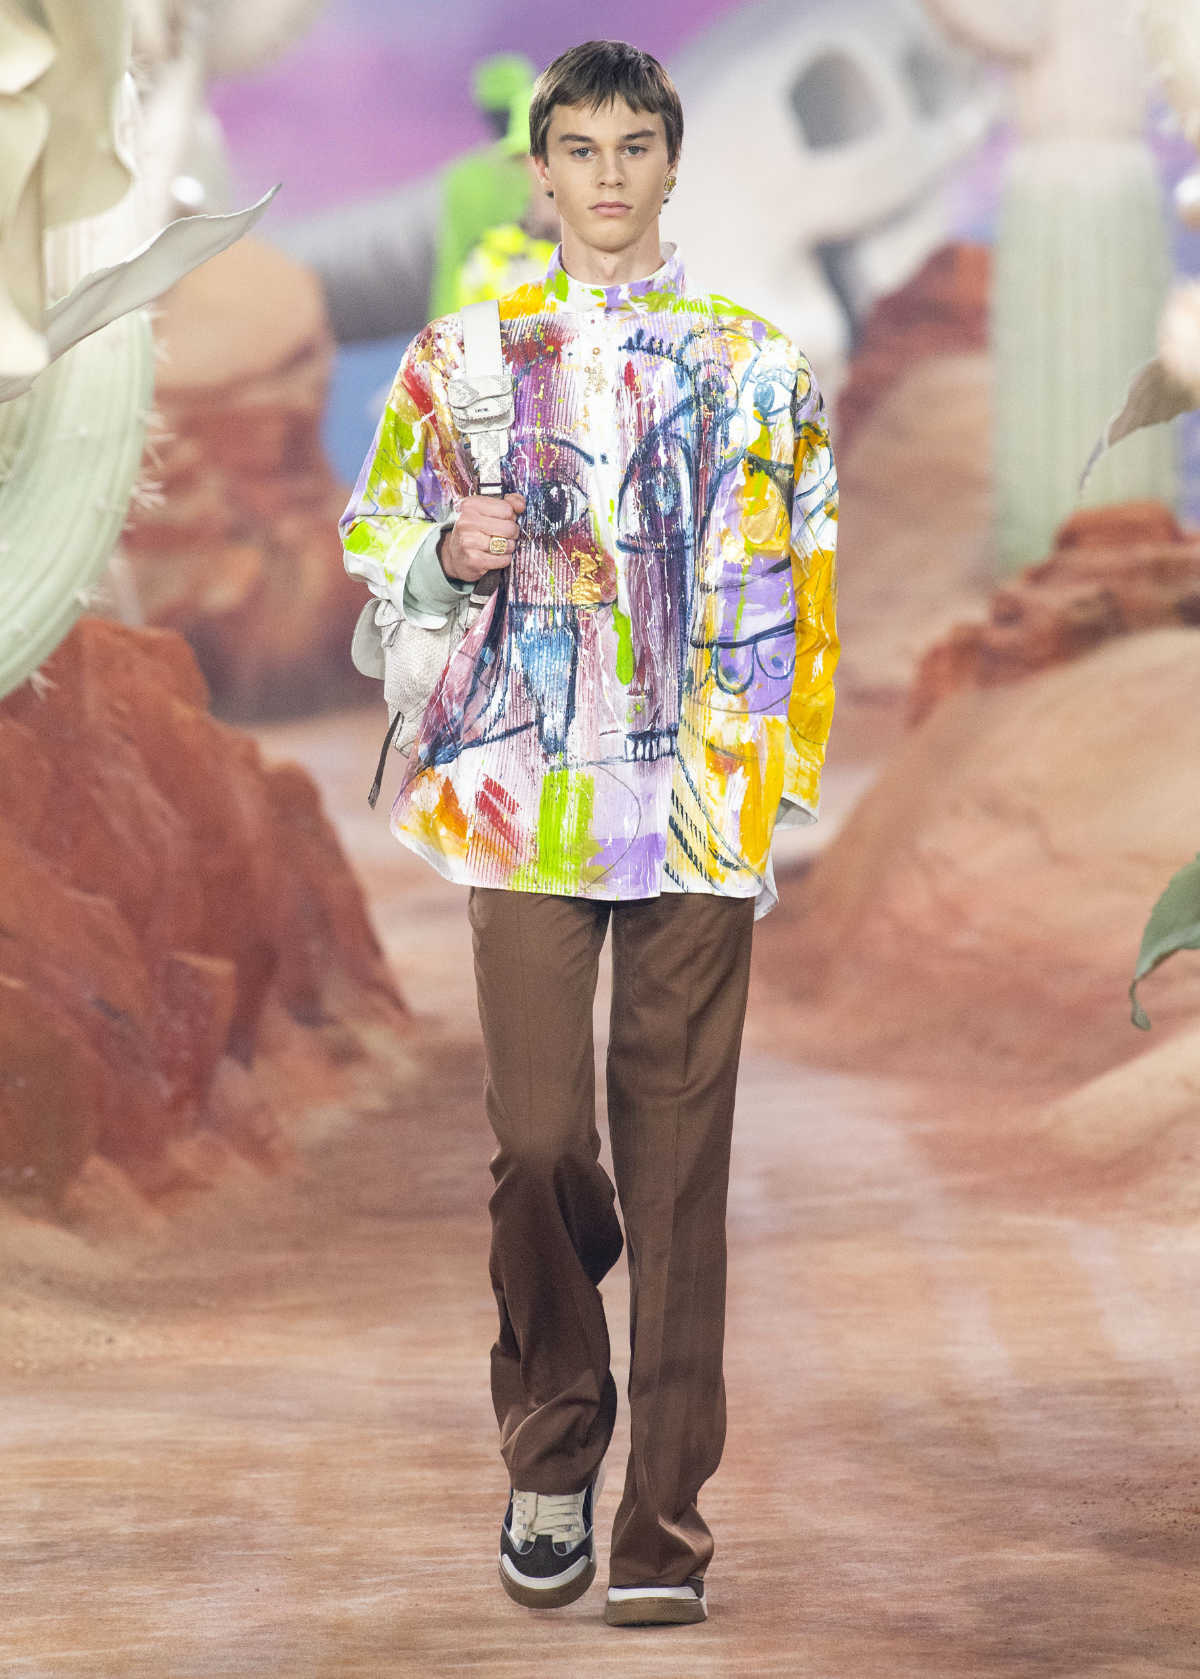 Dior Presents Its New Men's Summer 2022 Collection